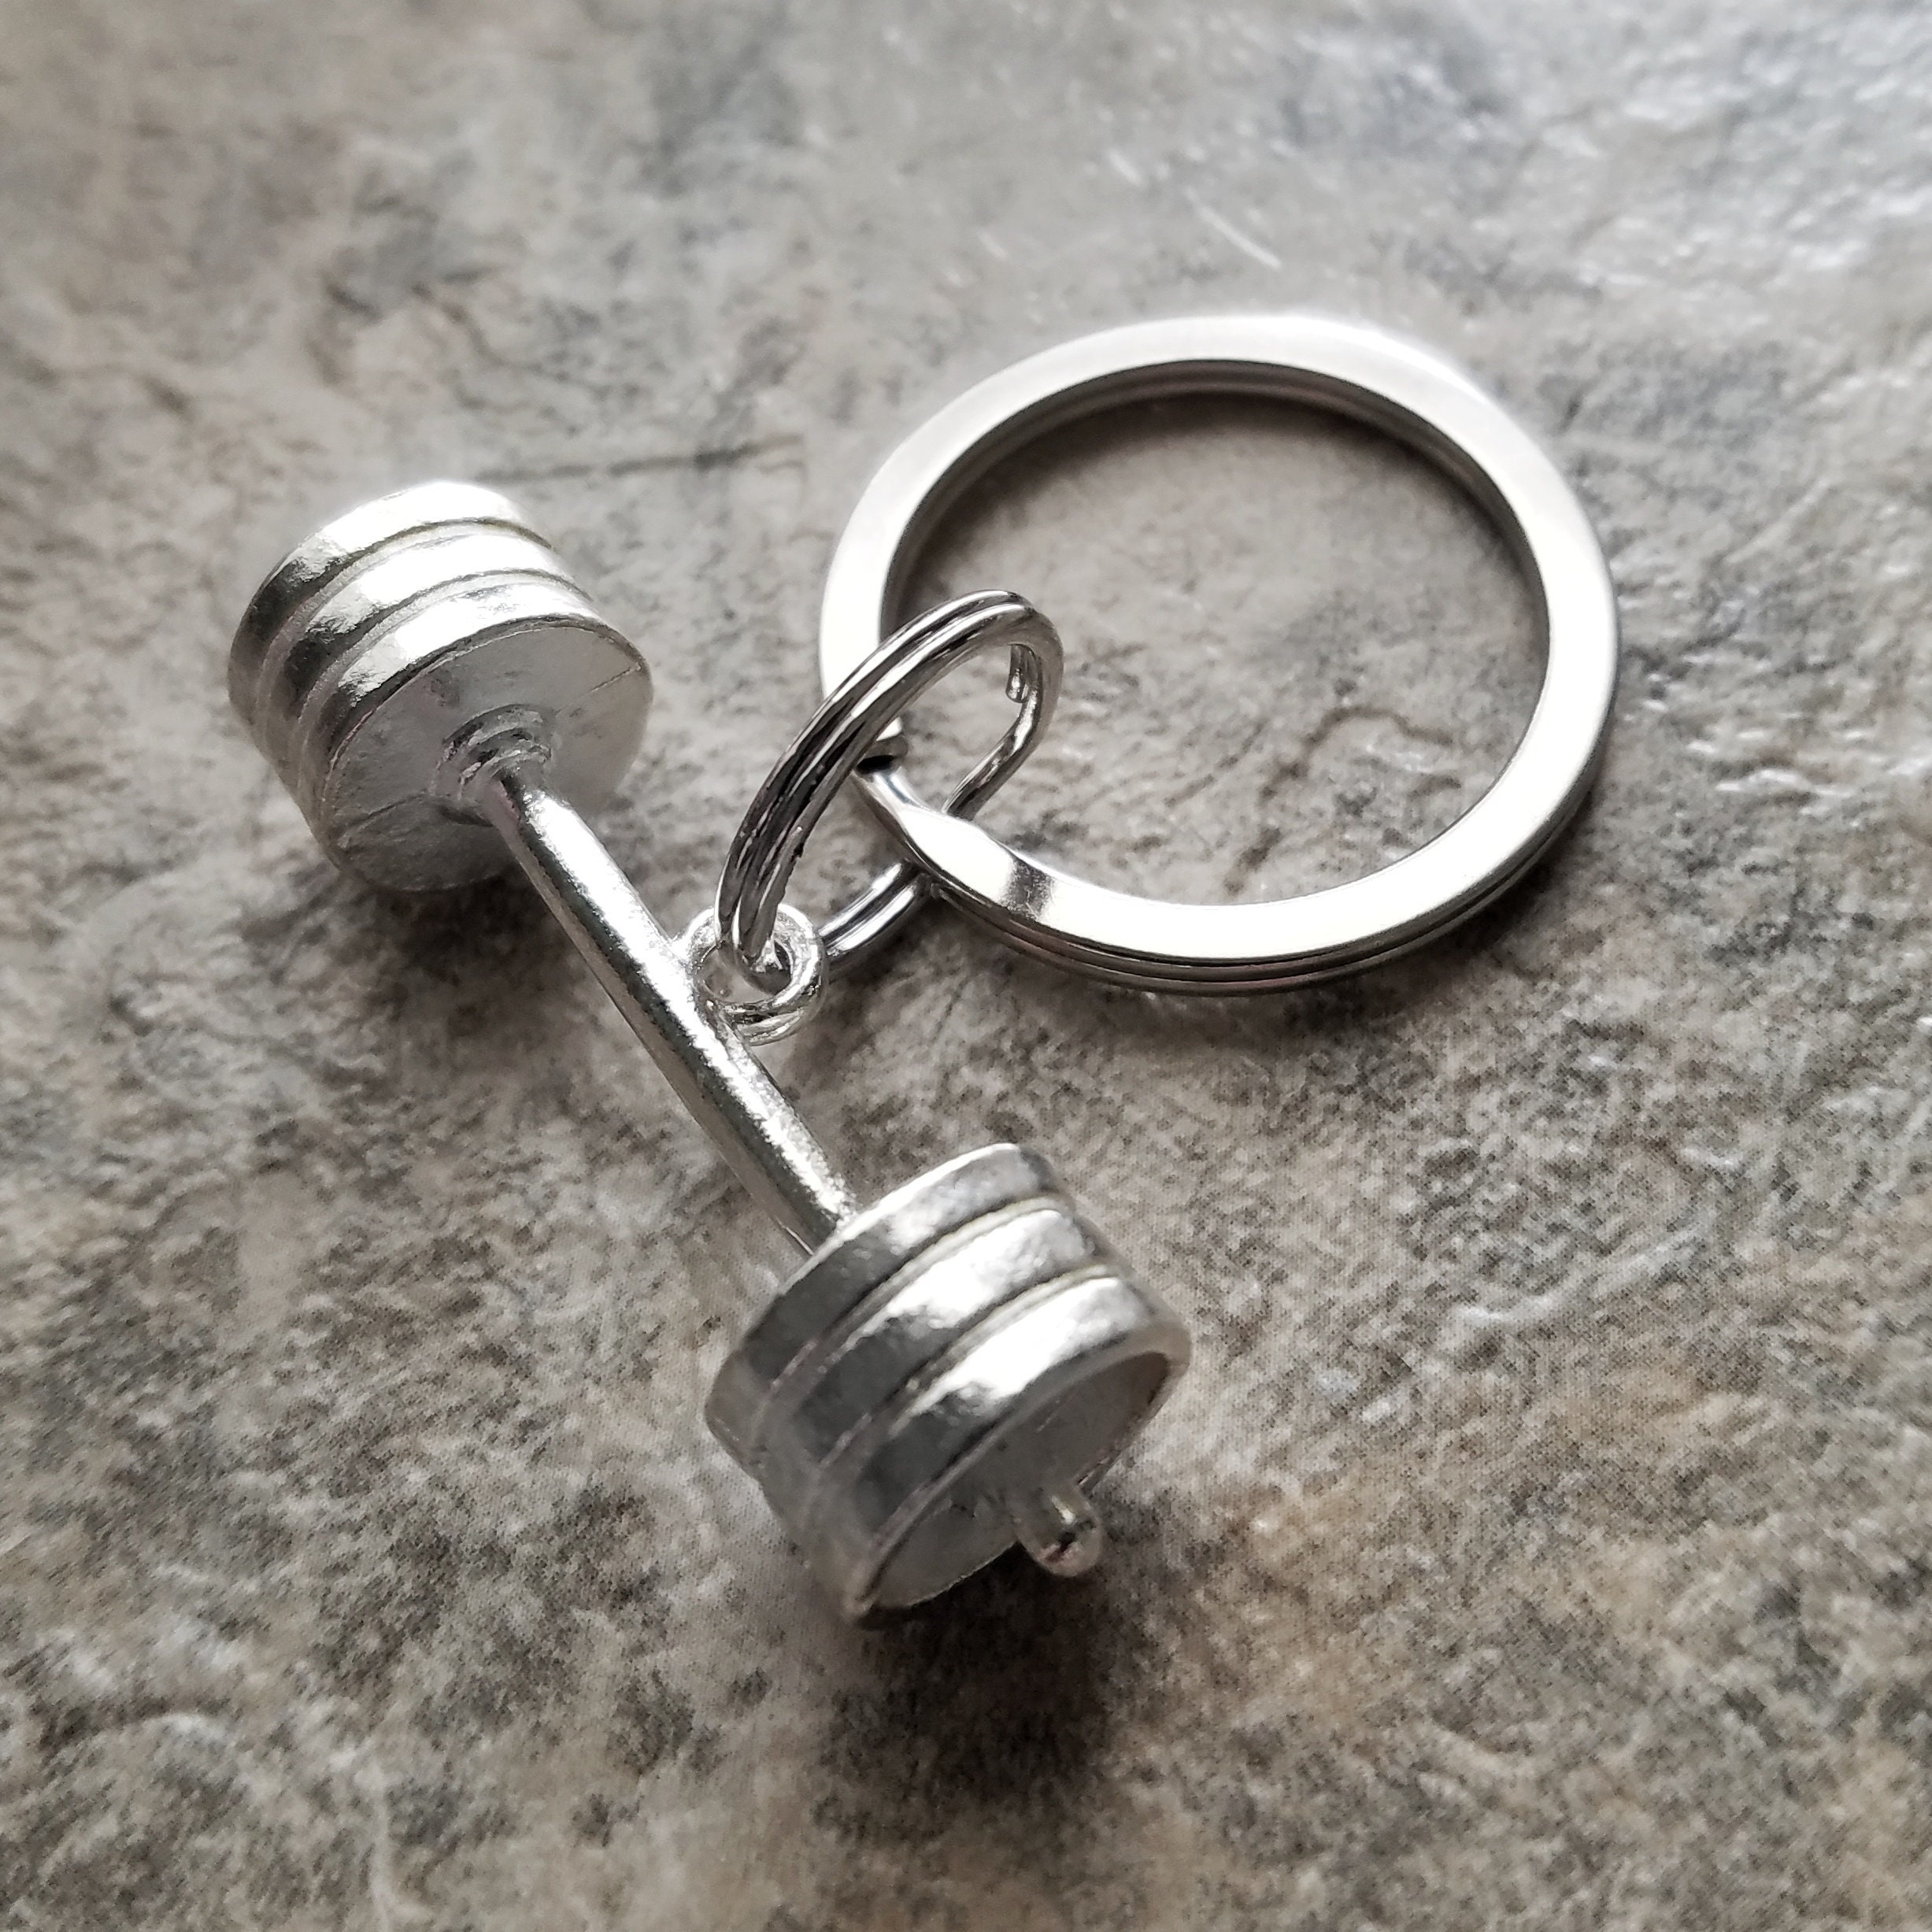 Detail Barbell Keychain Nomer 30